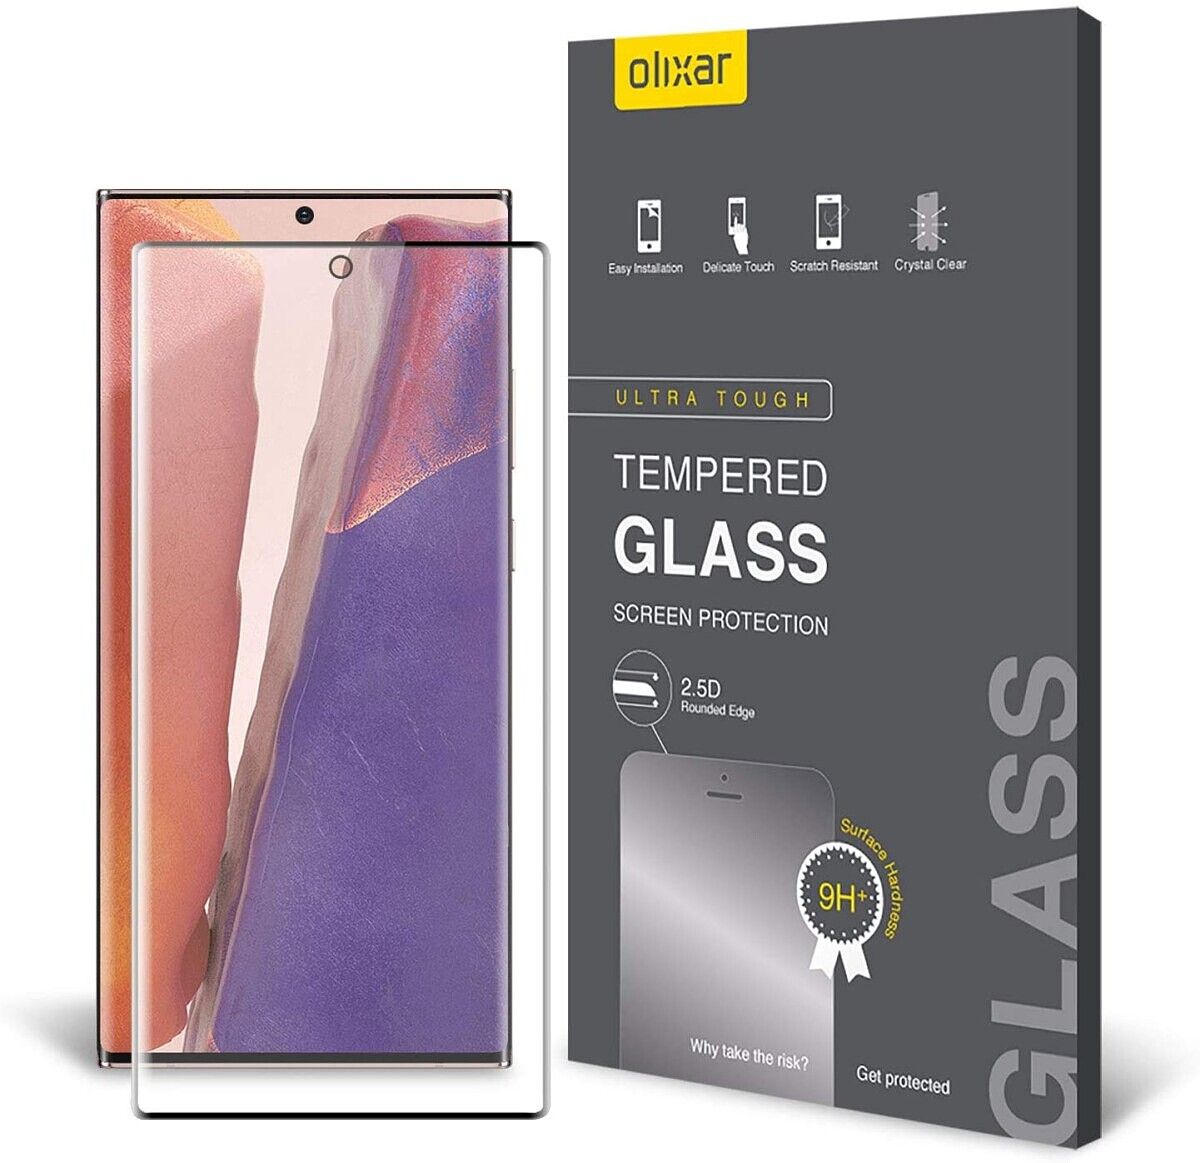 Olixar is another reputable brand in screen protectors, and you can pick up one of their tempered glass protectors for the Samsung Galaxy Note 20 now!